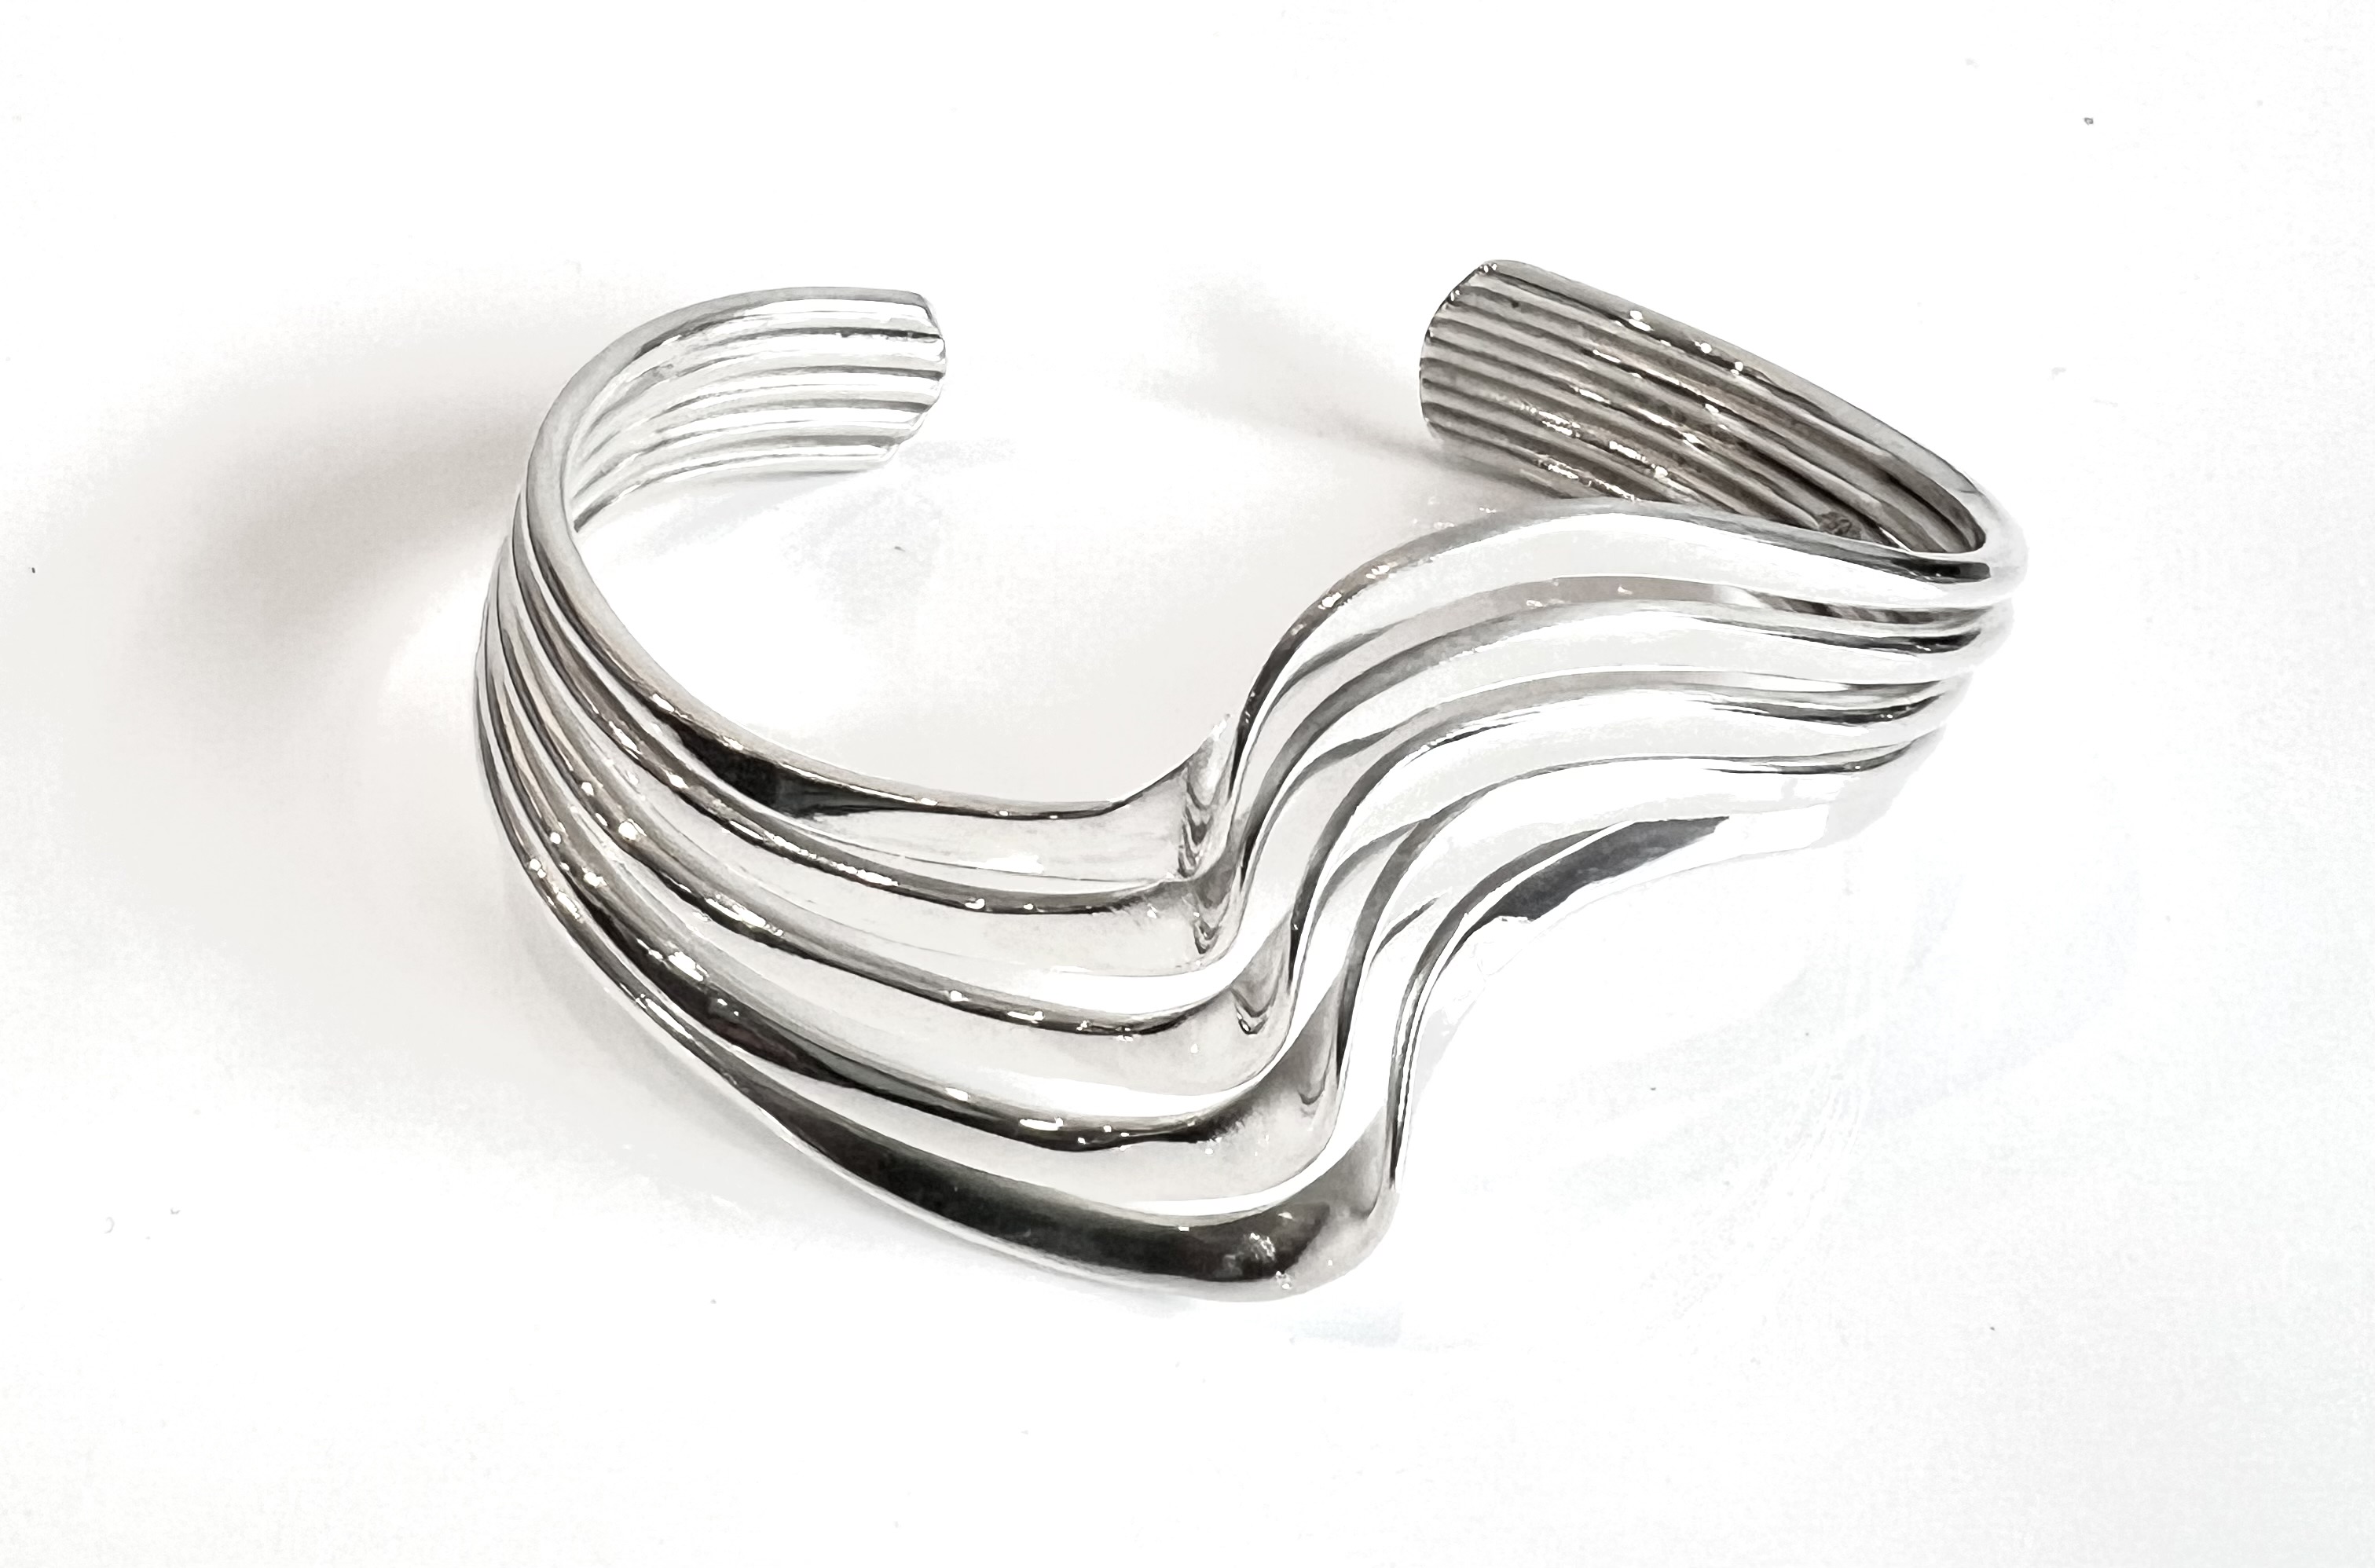 Three sterling silver modernist bangles of wavy form - one solid and the other two of pierced - Image 2 of 4